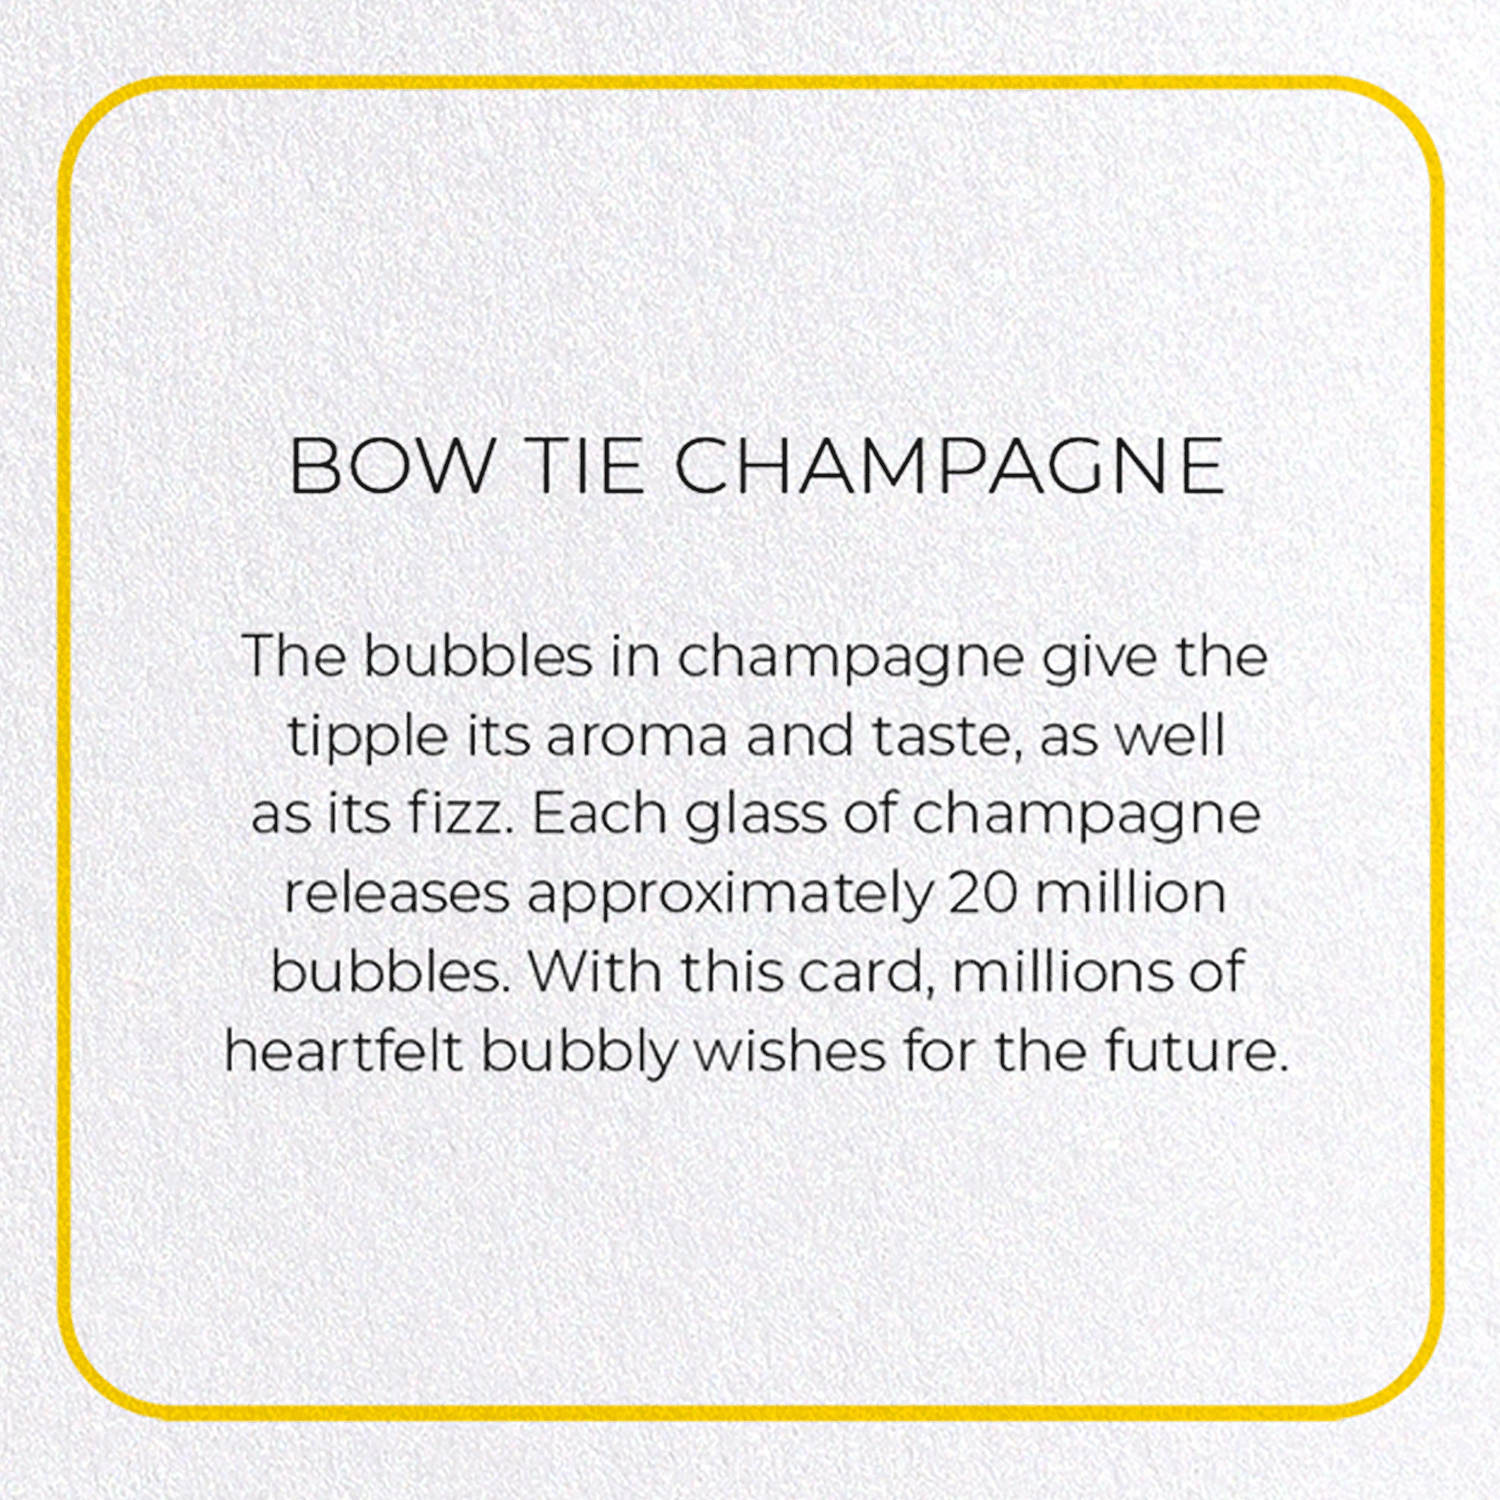 BOW TIE CHAMPAGNE